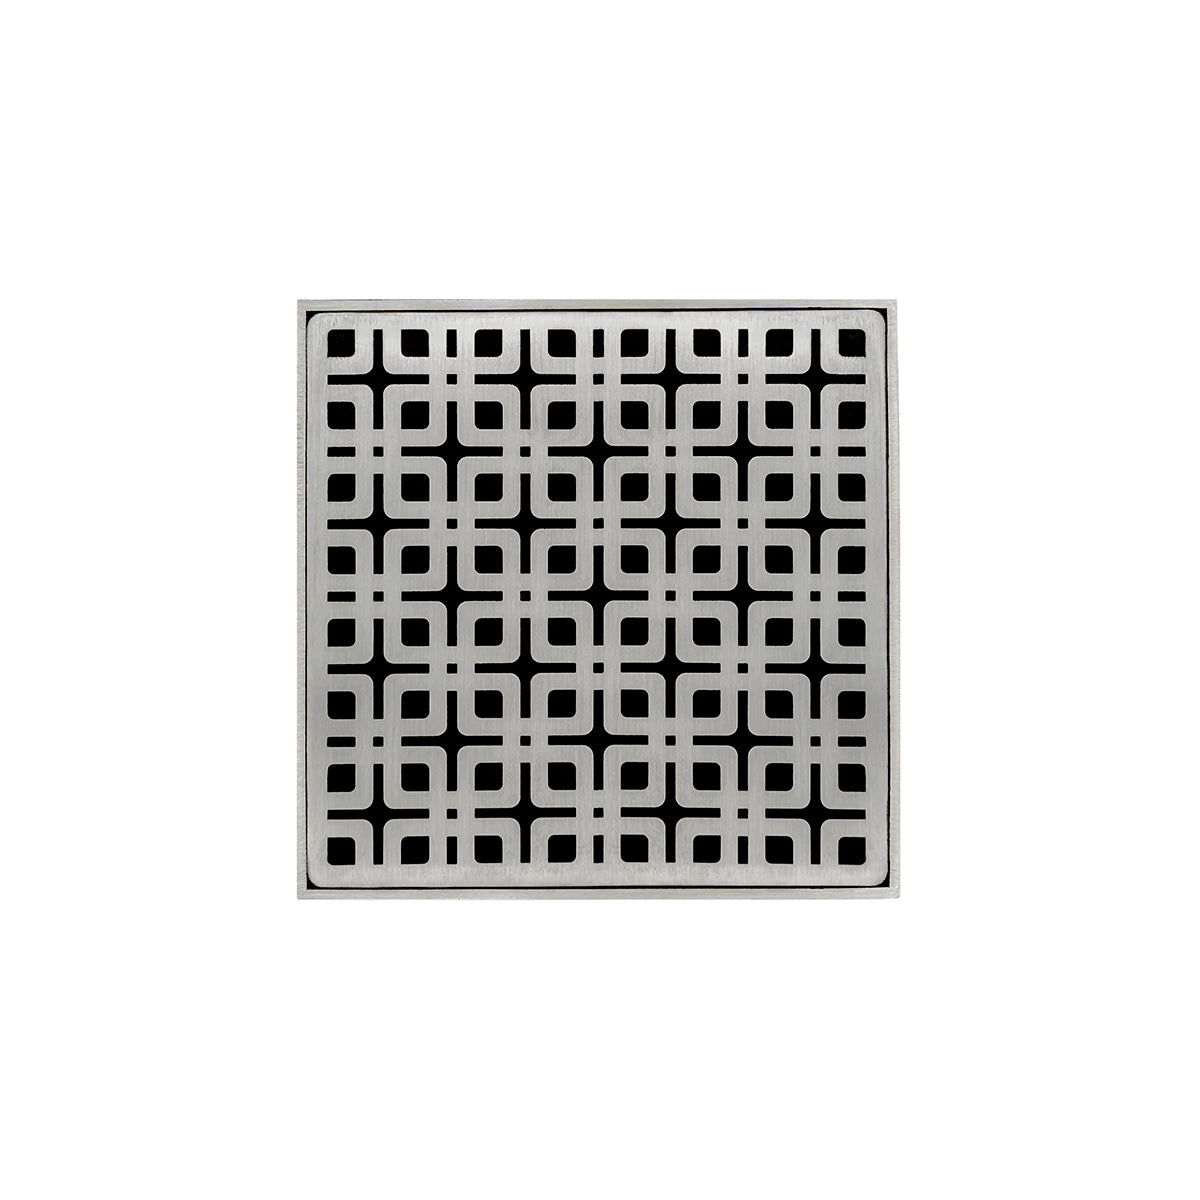 Infinity Drain 5" x 5" KDB 5 Premium Center Drain Kit with Link Pattern Decorative Plate with ABS Bonded Flange Drain Body, 2", 3" and 4" Outlet